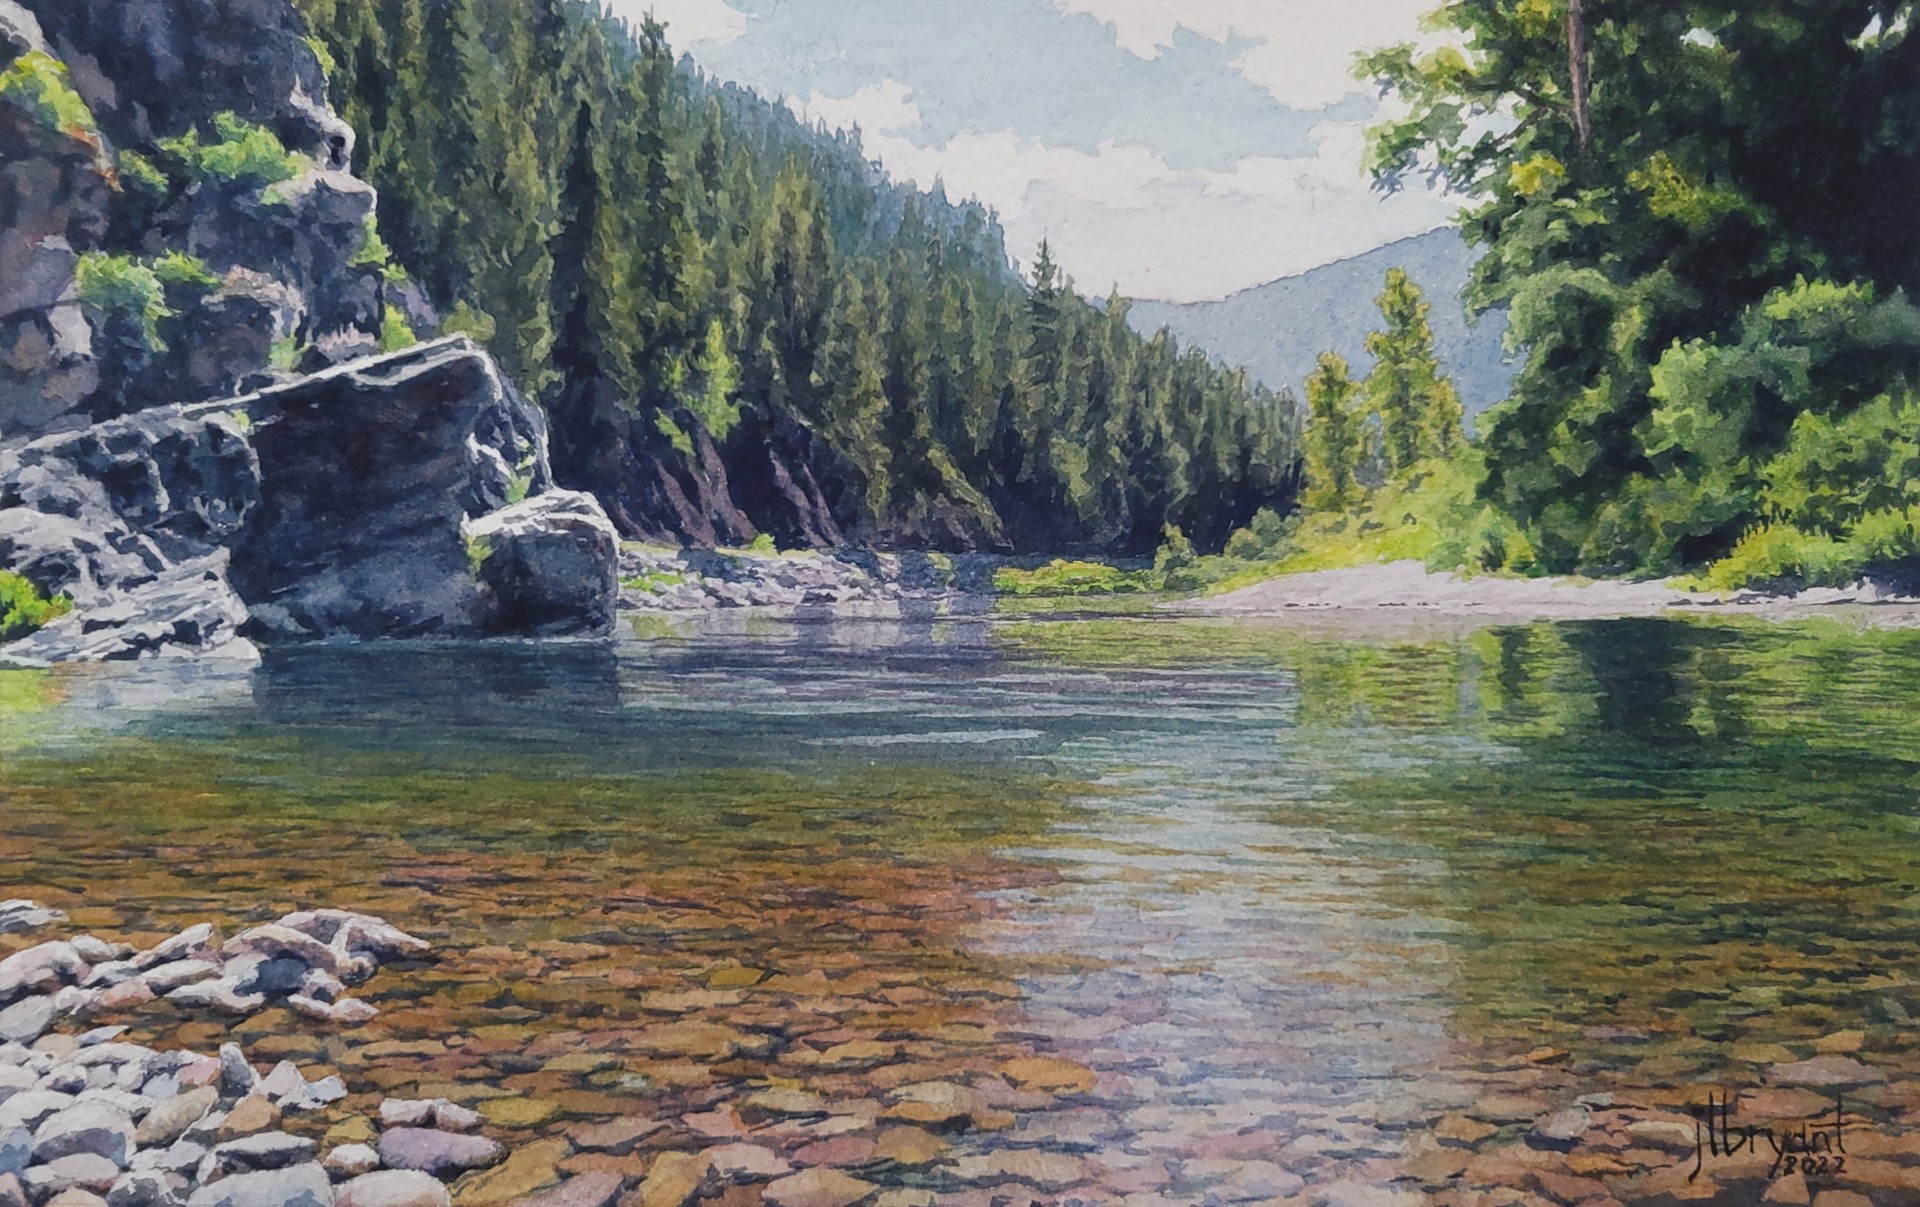 North Fork, Coeur d'Alene River by Jessica Bryant